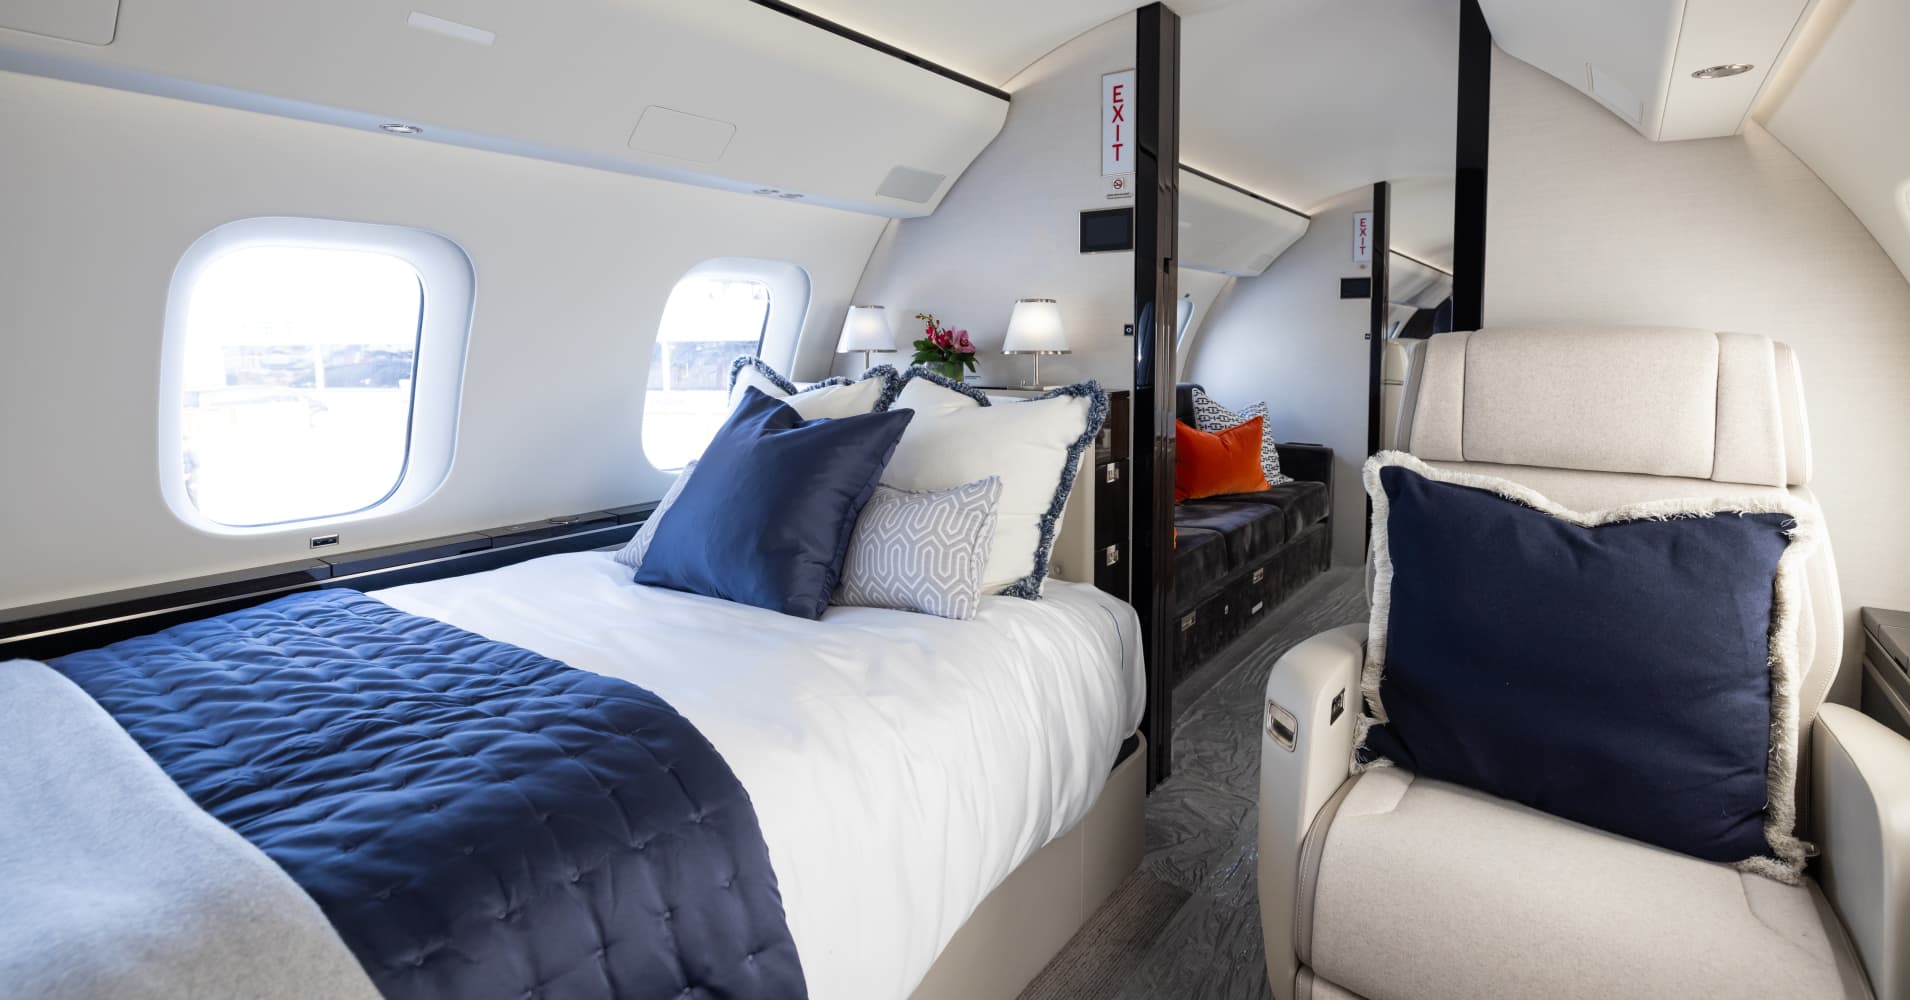 how bombardier is cashing in on business elite's love affair with private jet travel